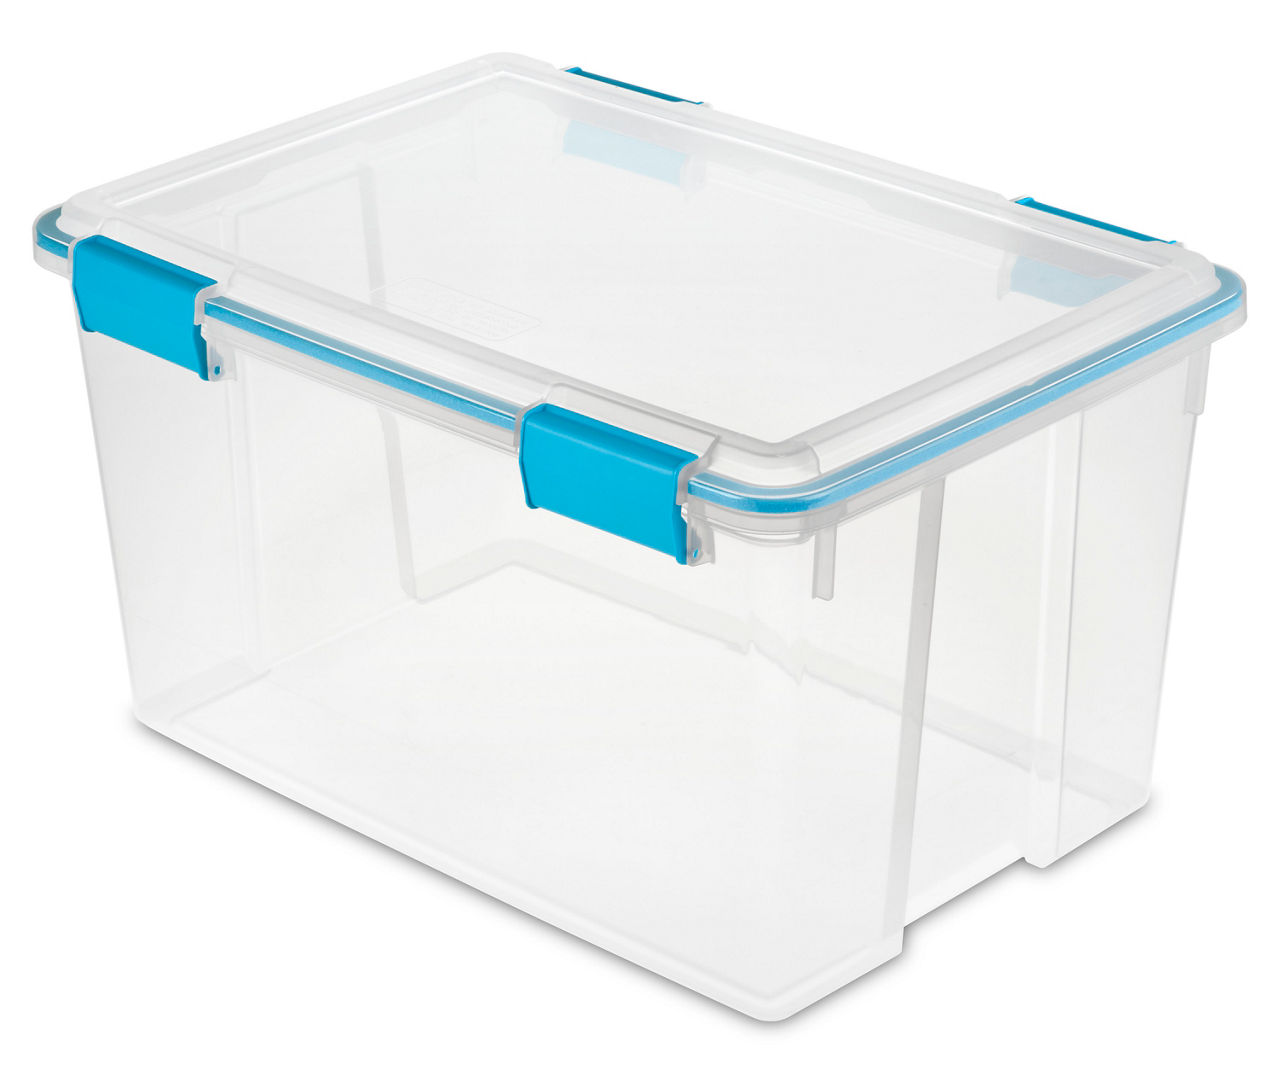 Sterilite 54 Qt. Gasket Box in Clear with Blue Latches, (8-Pack